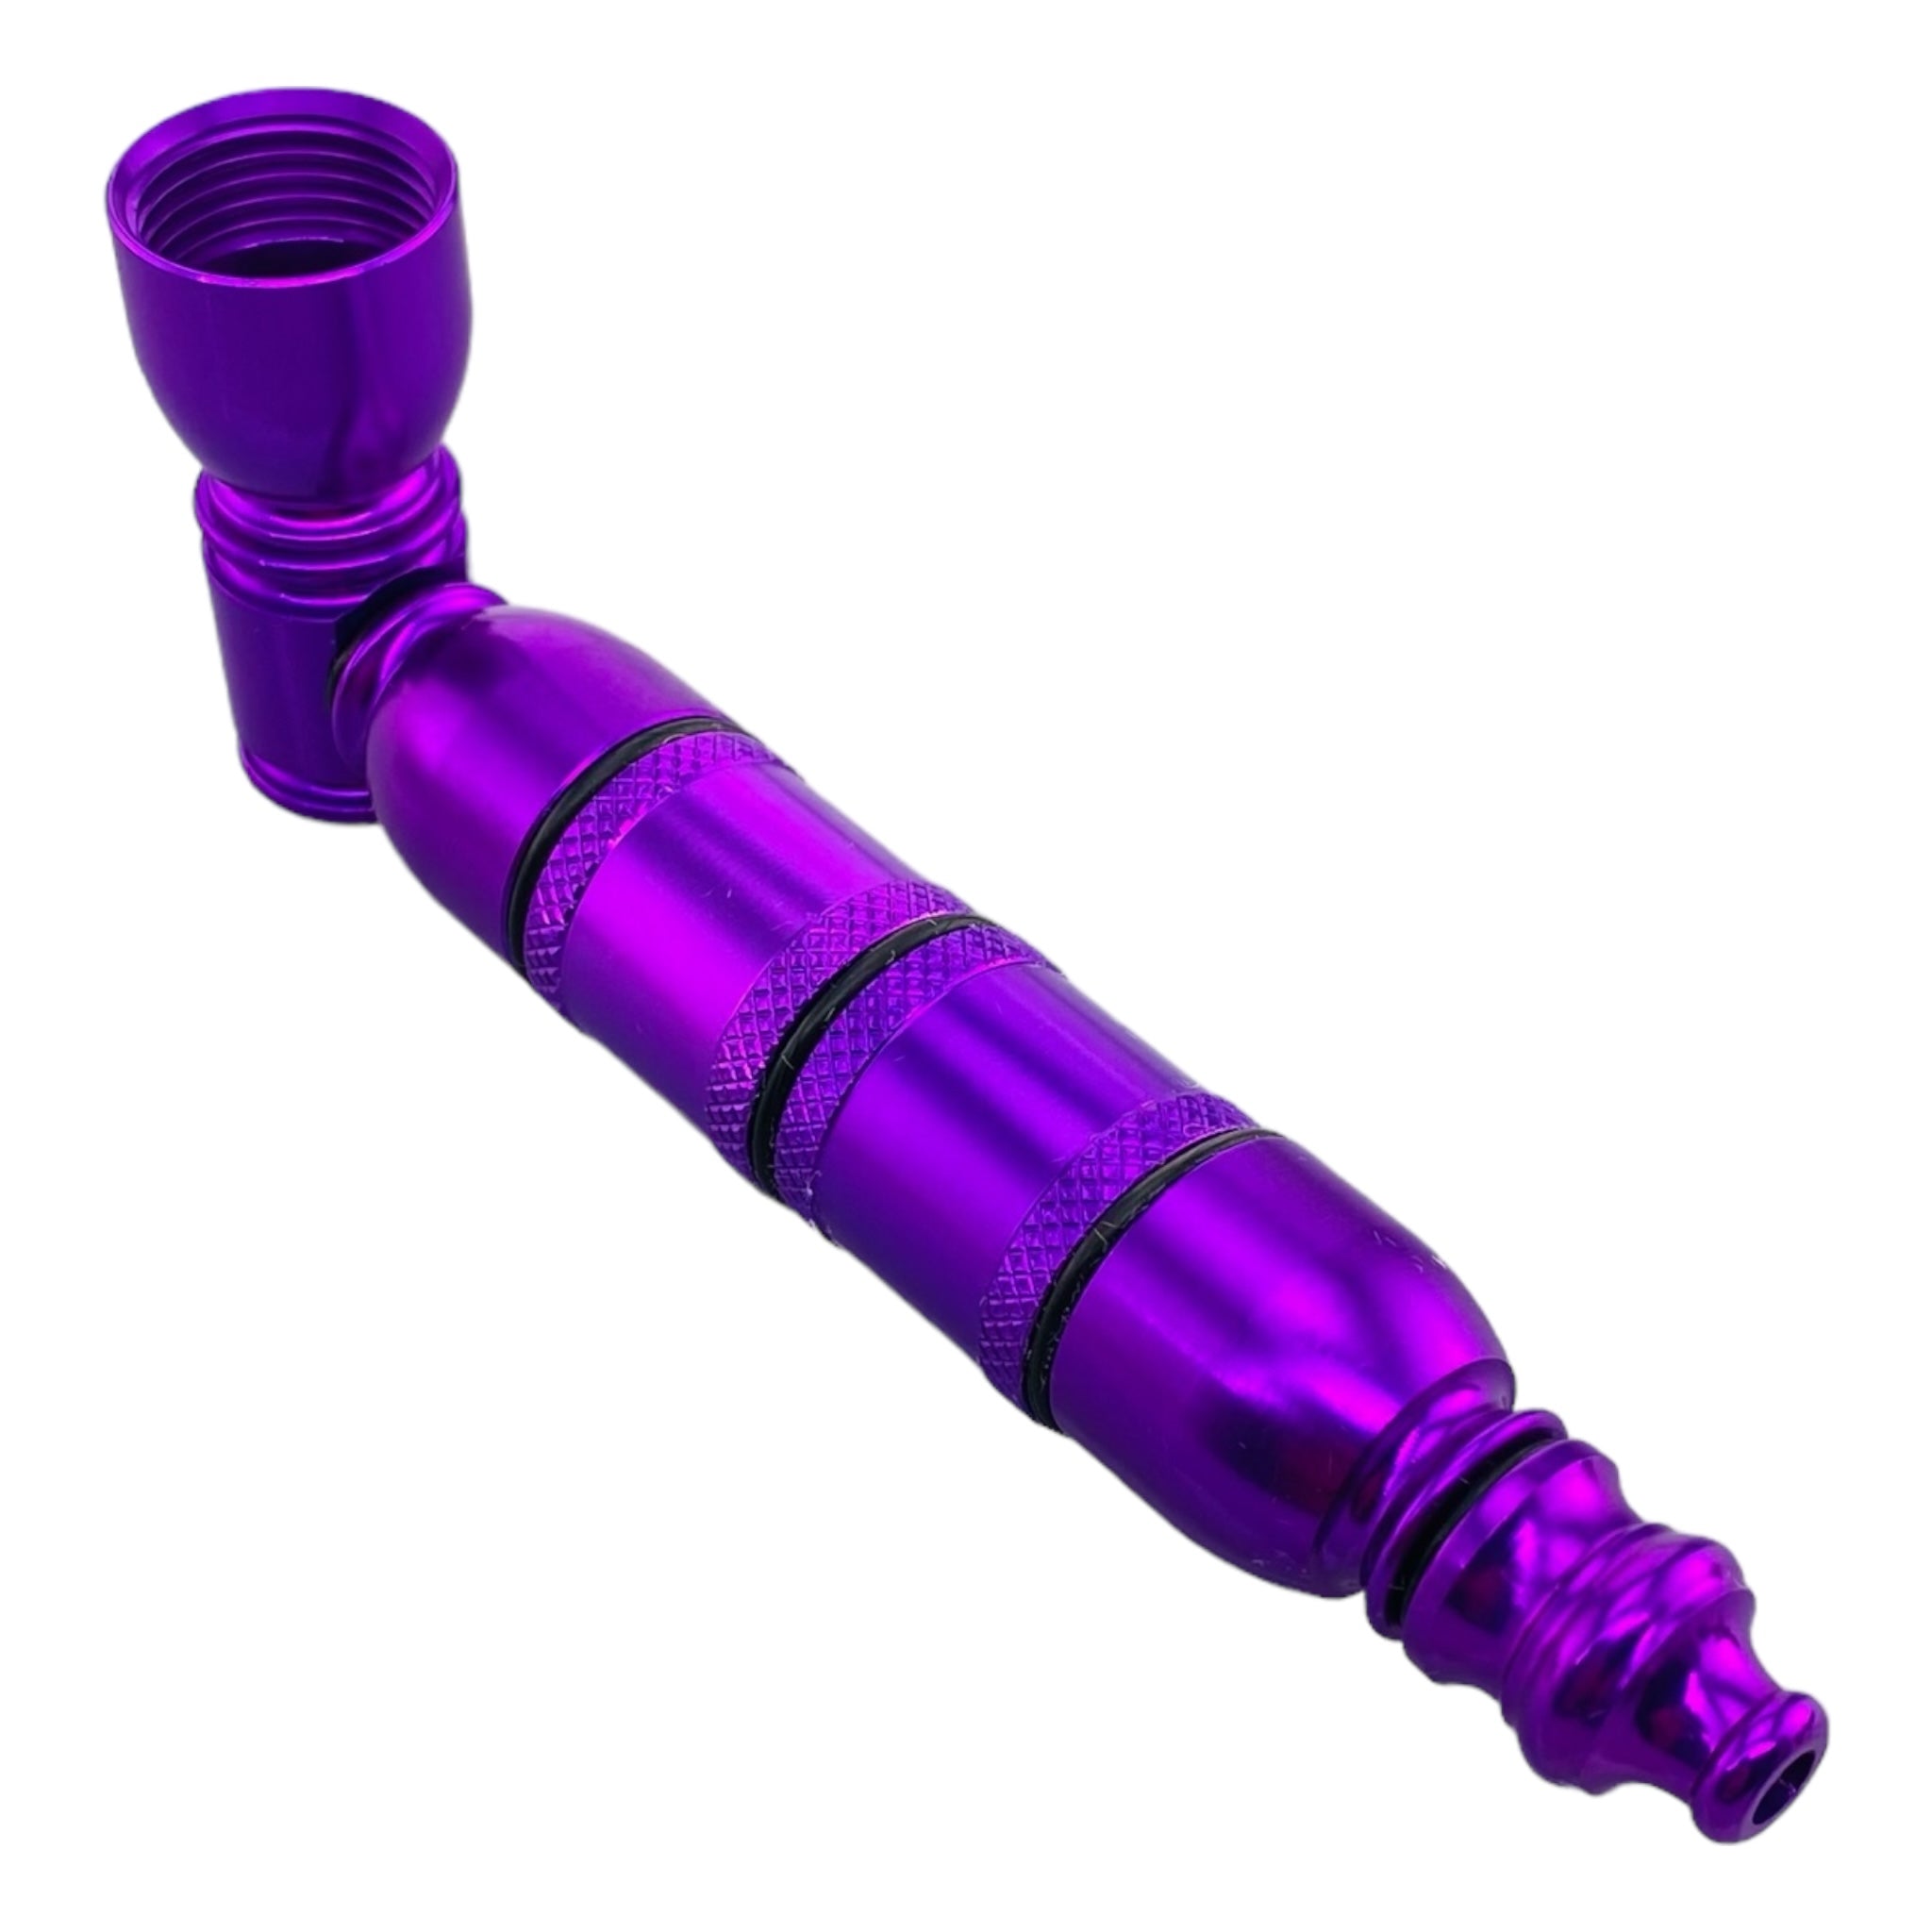 Metal Hand Pipes - Purple Extra Large Chamber Hand Pipe